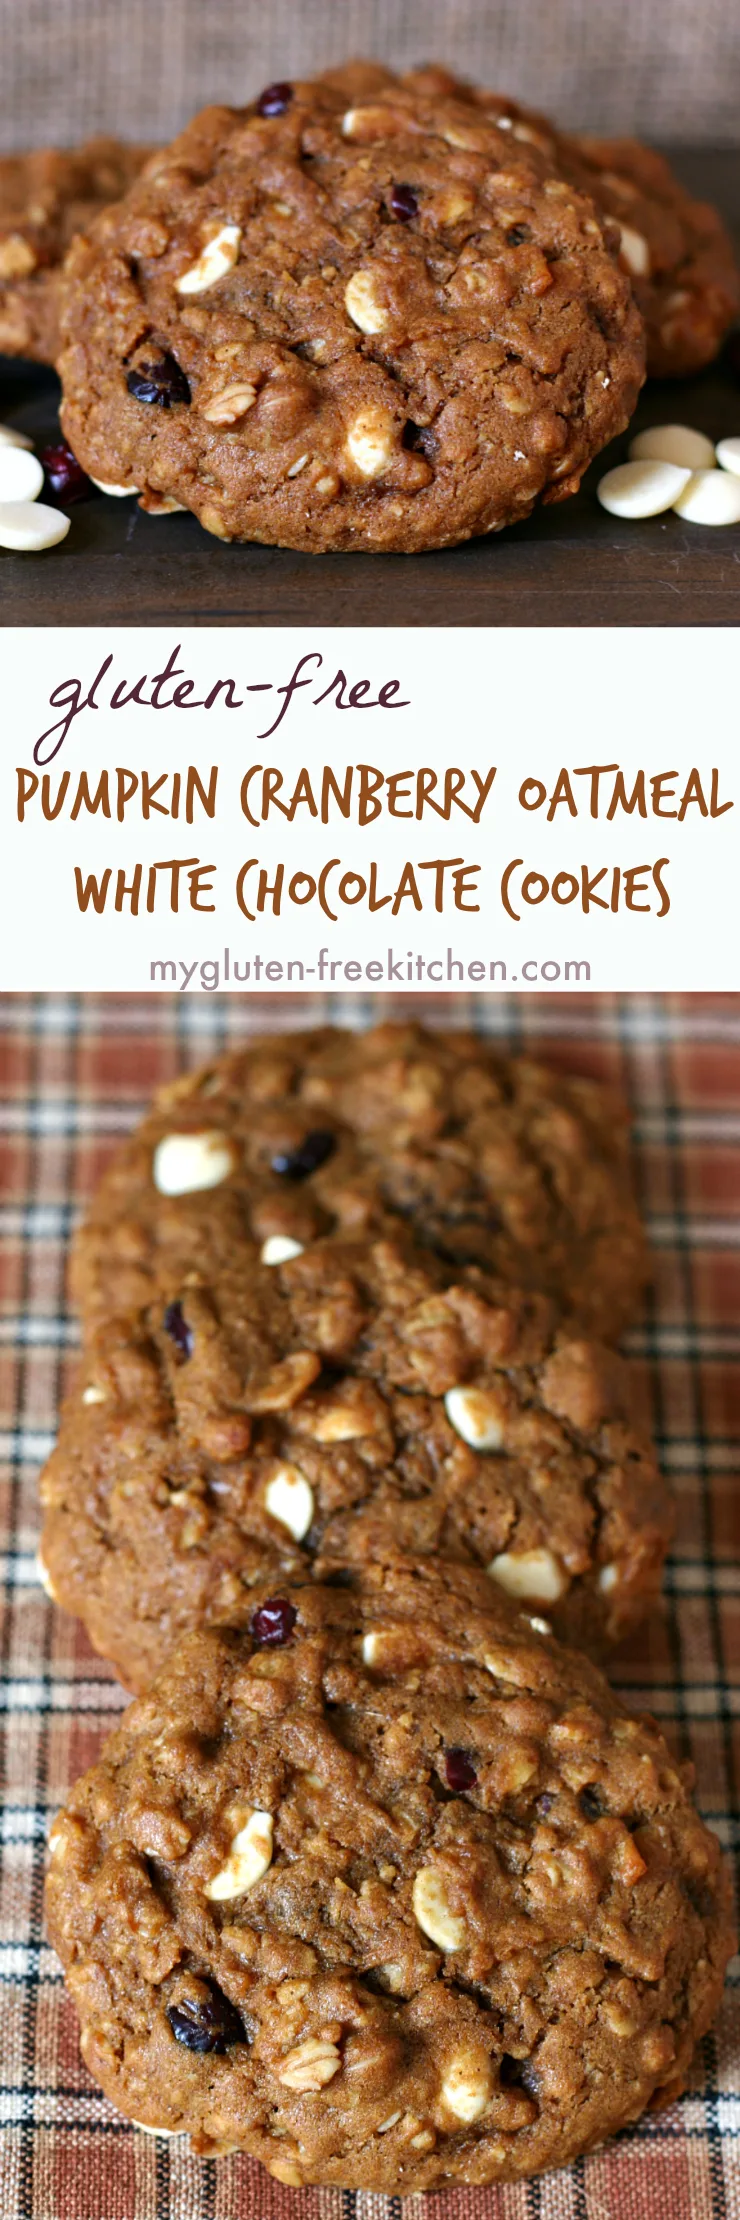 Gluten-free Pumpkin Cranberry Oatmeal White Chocolate Chip Cookies stack